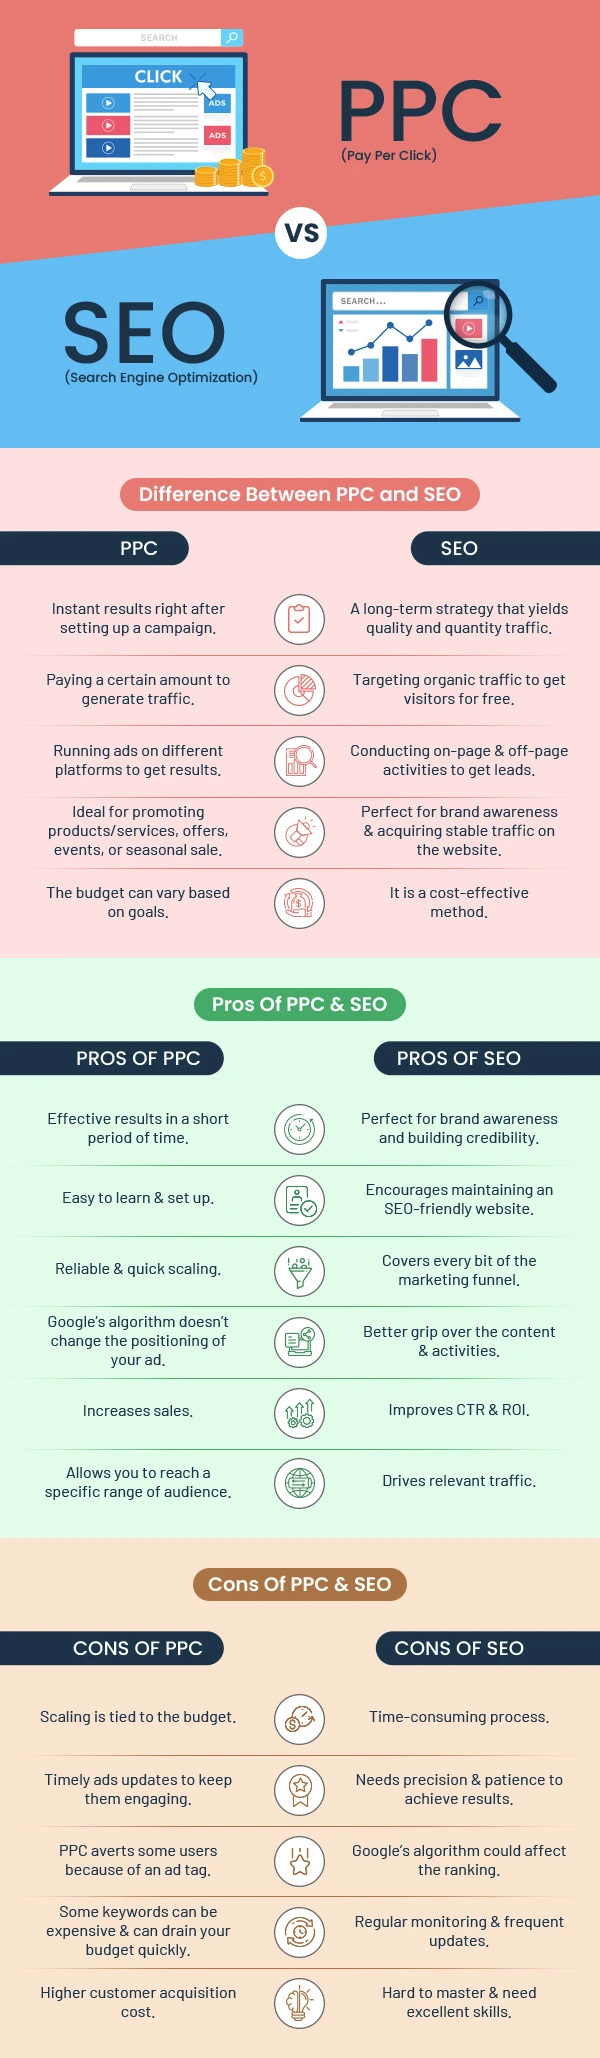 Difference-Between-PPC-and-SEO